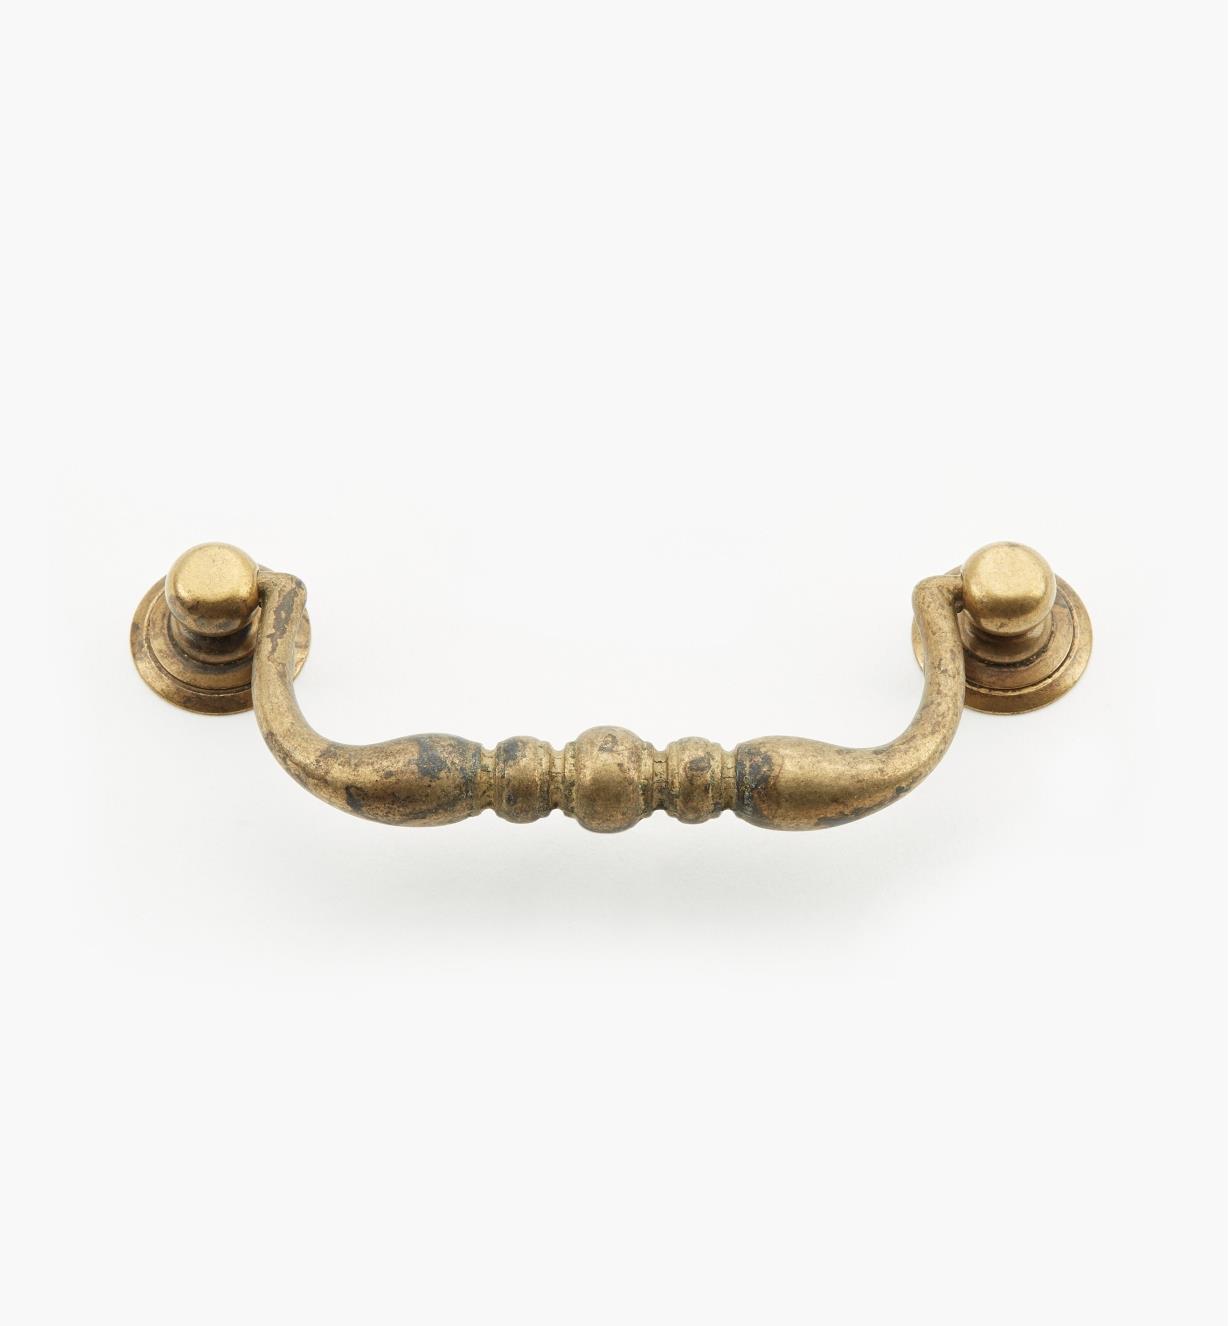 01A3962 - 96mm Old Brass Triple Bead Stop Handle